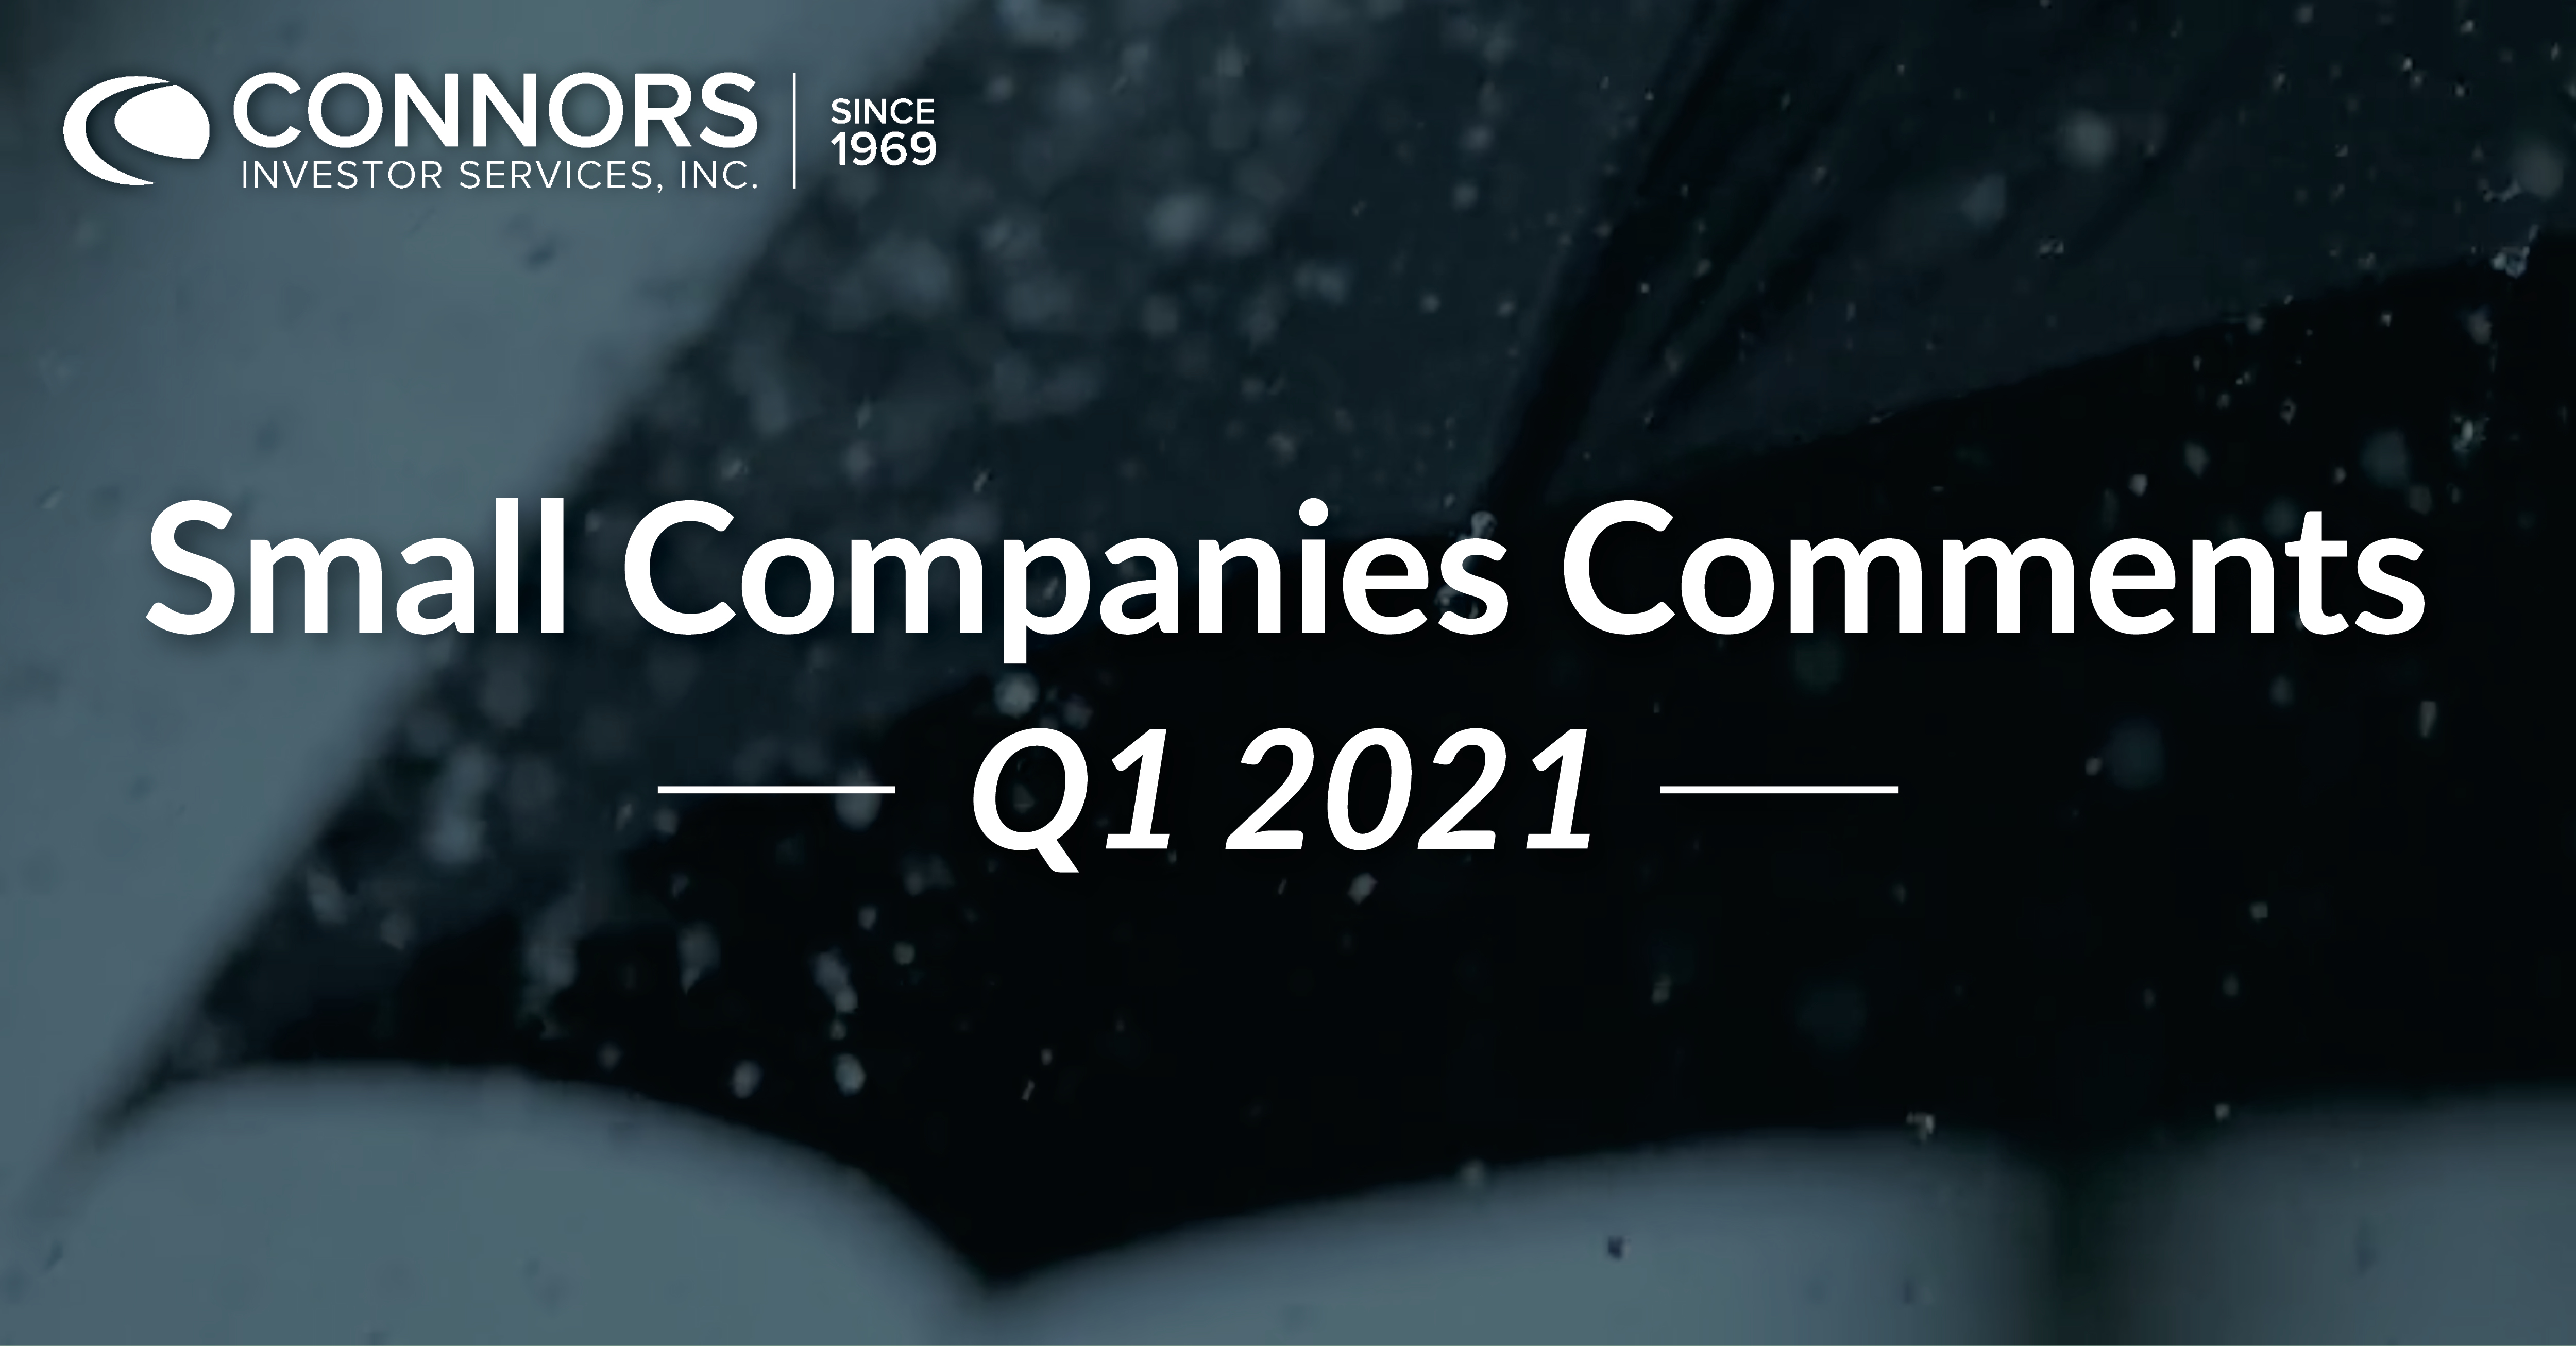 Q1 2021 Small Companies Comments